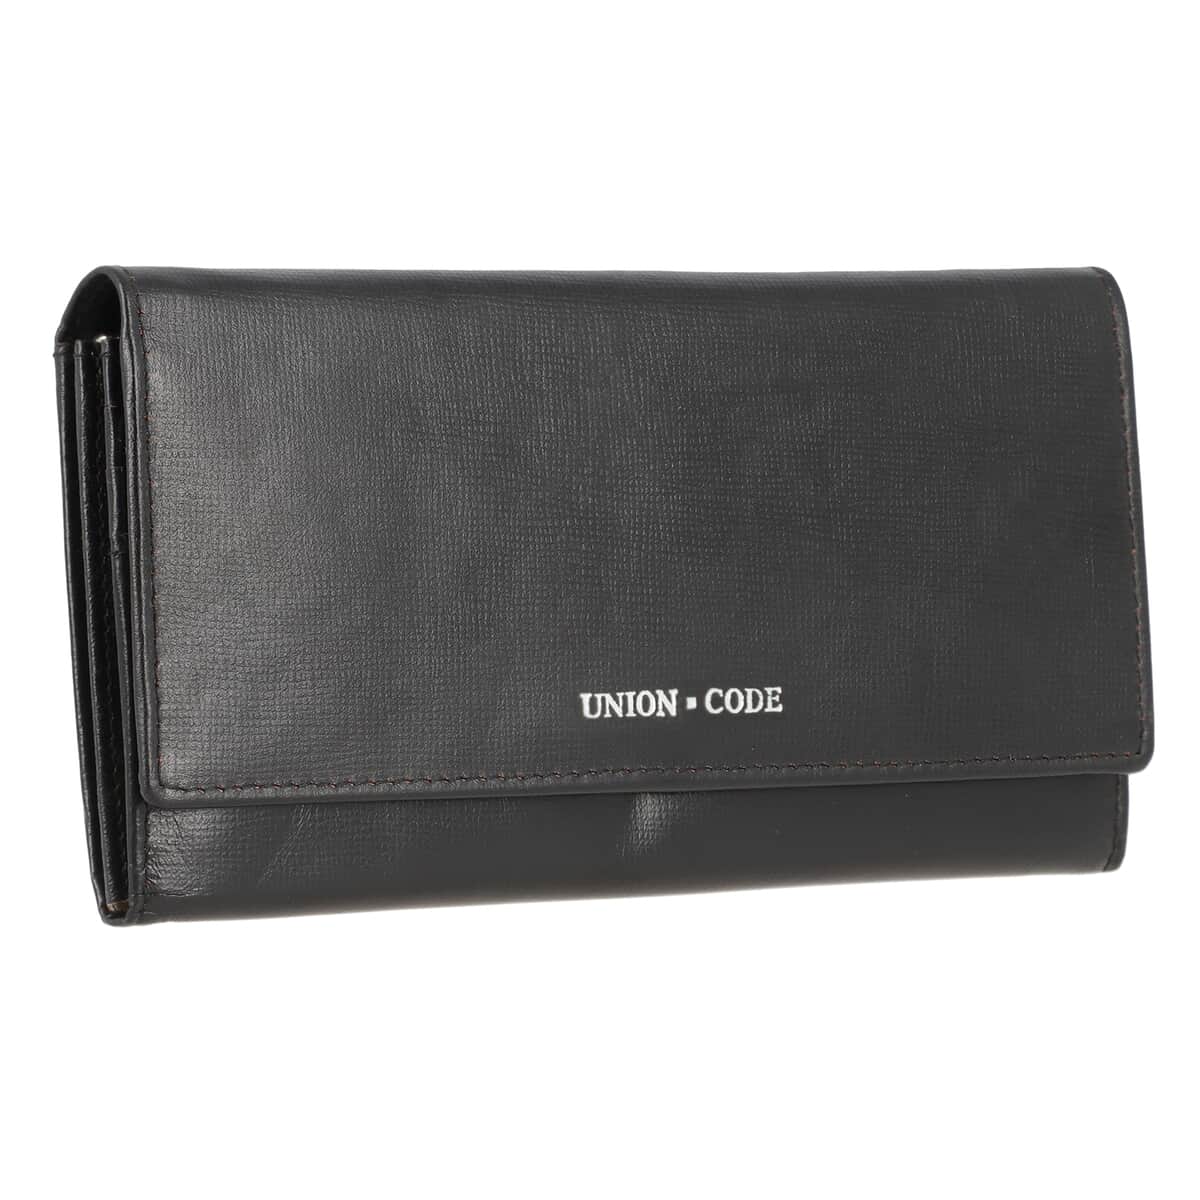 "UNION CODE -RFID Protected 100% Genuine Leather Women's Wallet SIZE: 7.5(L)x4.5(W) inches COLOR: Black " image number 5